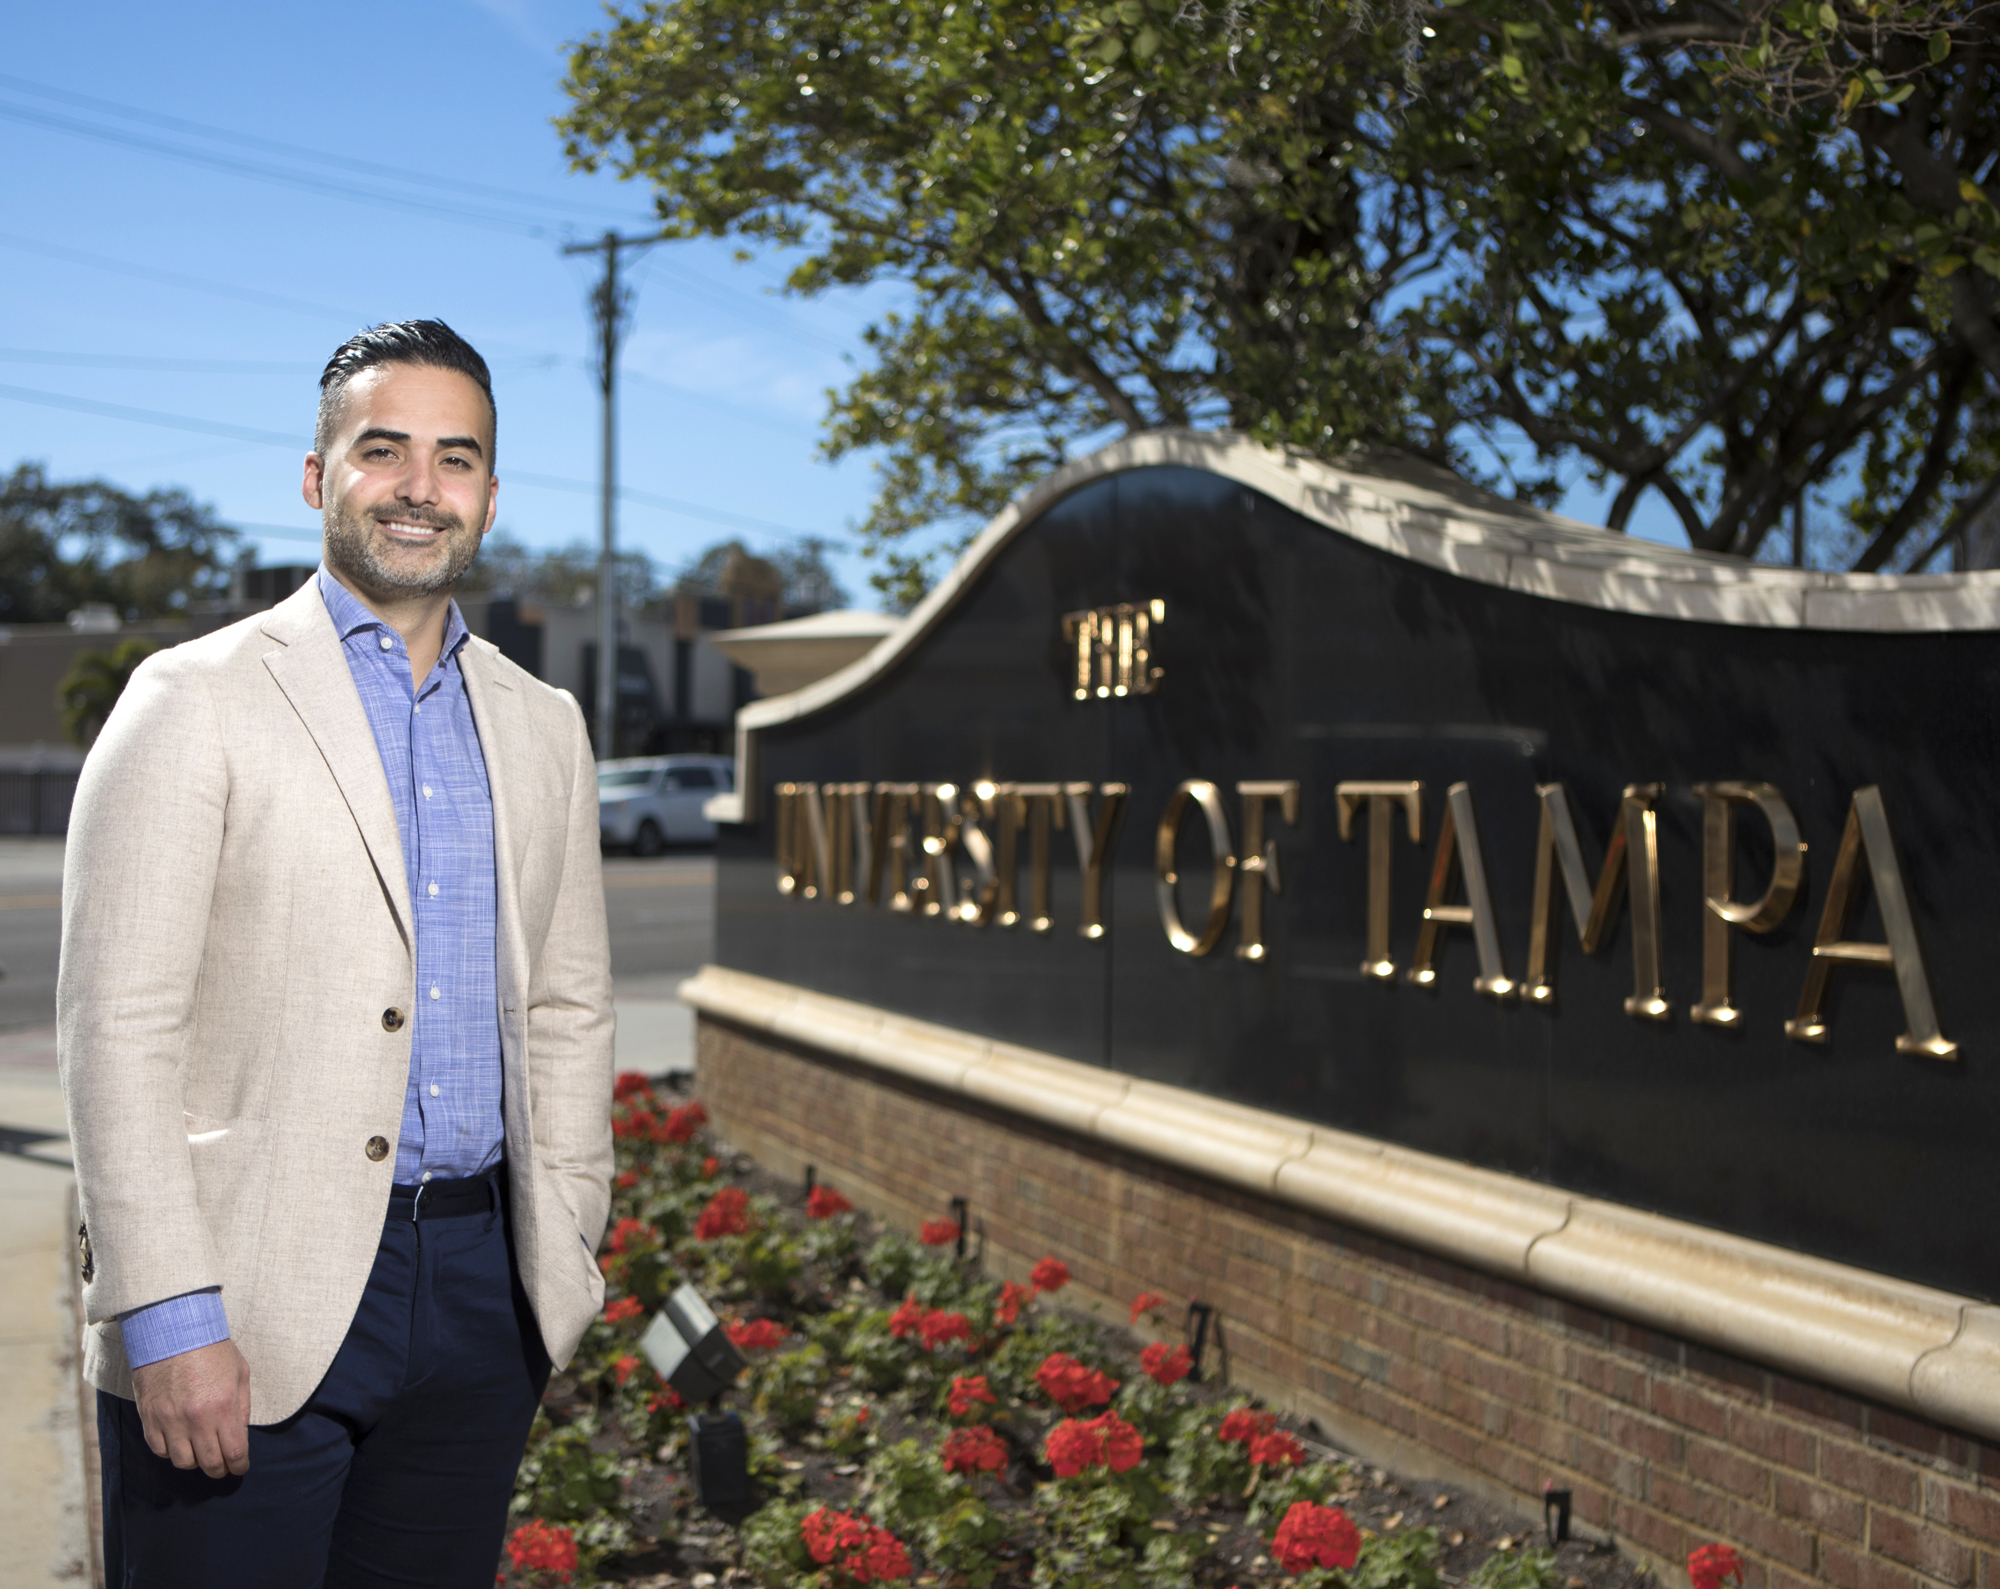 Mark Wemple. Bobby Soroory earned a Master of Business Administration from the University of Tampa in 2010 and a master’s in finance in 2011.